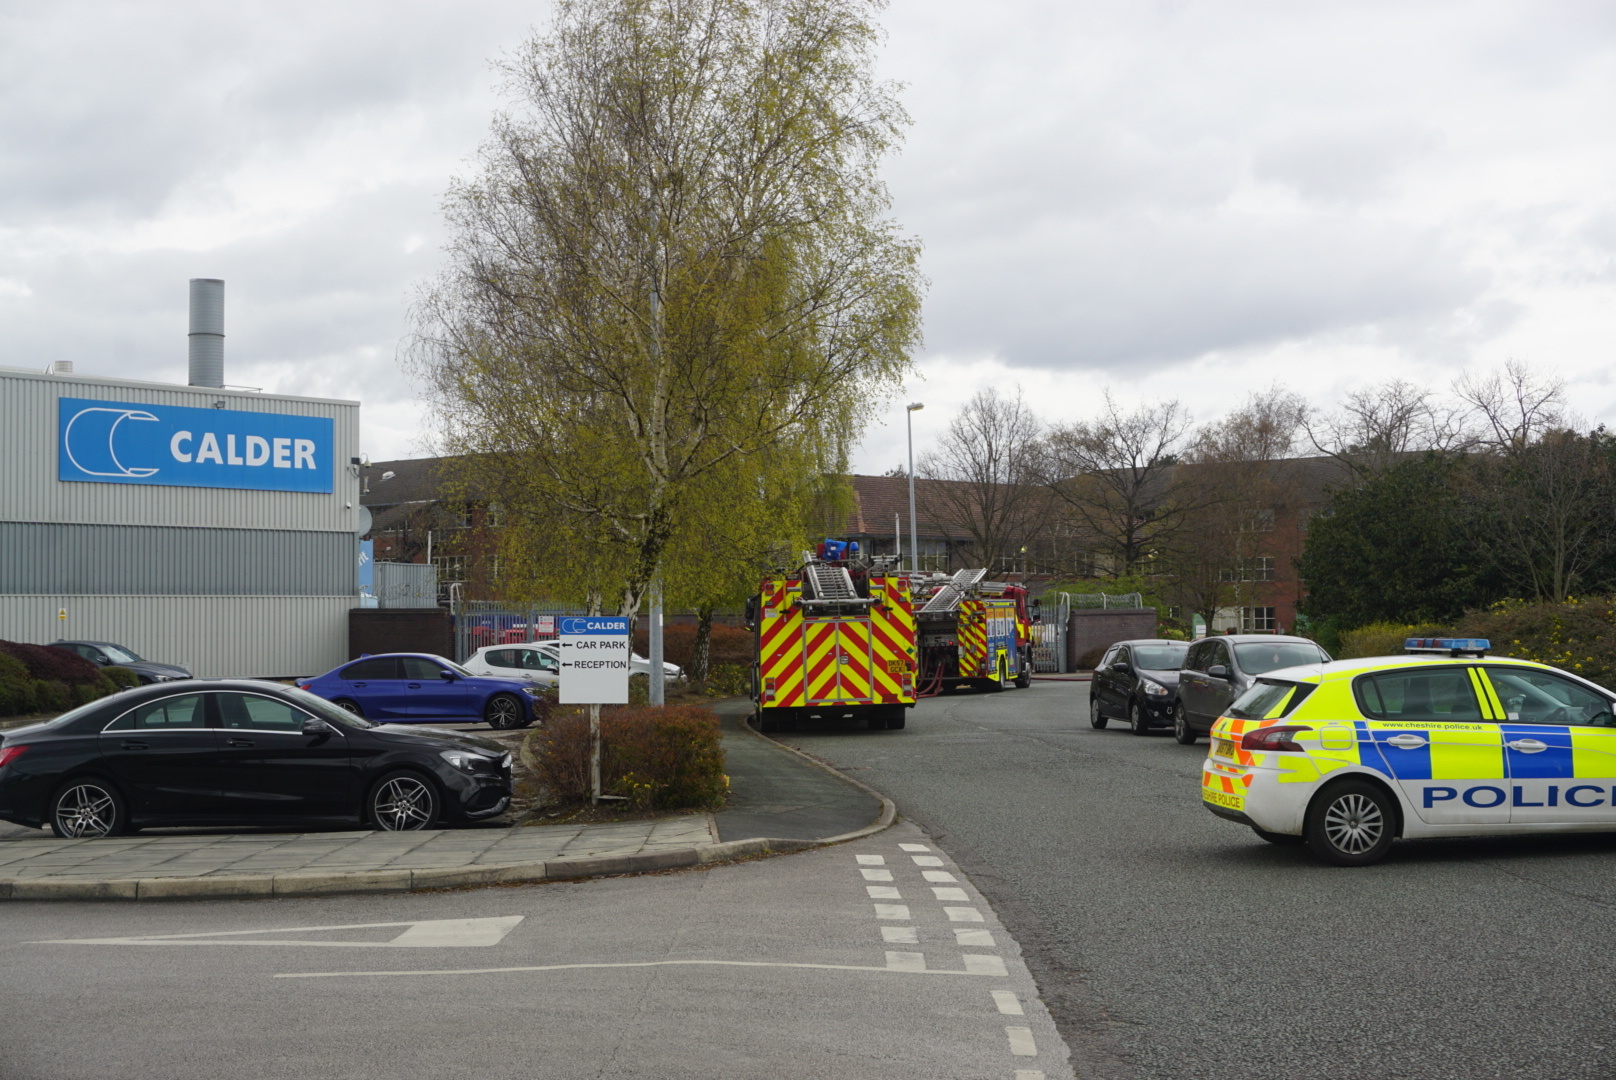 Four fire engines were called to the incident on Jupiter Drive.